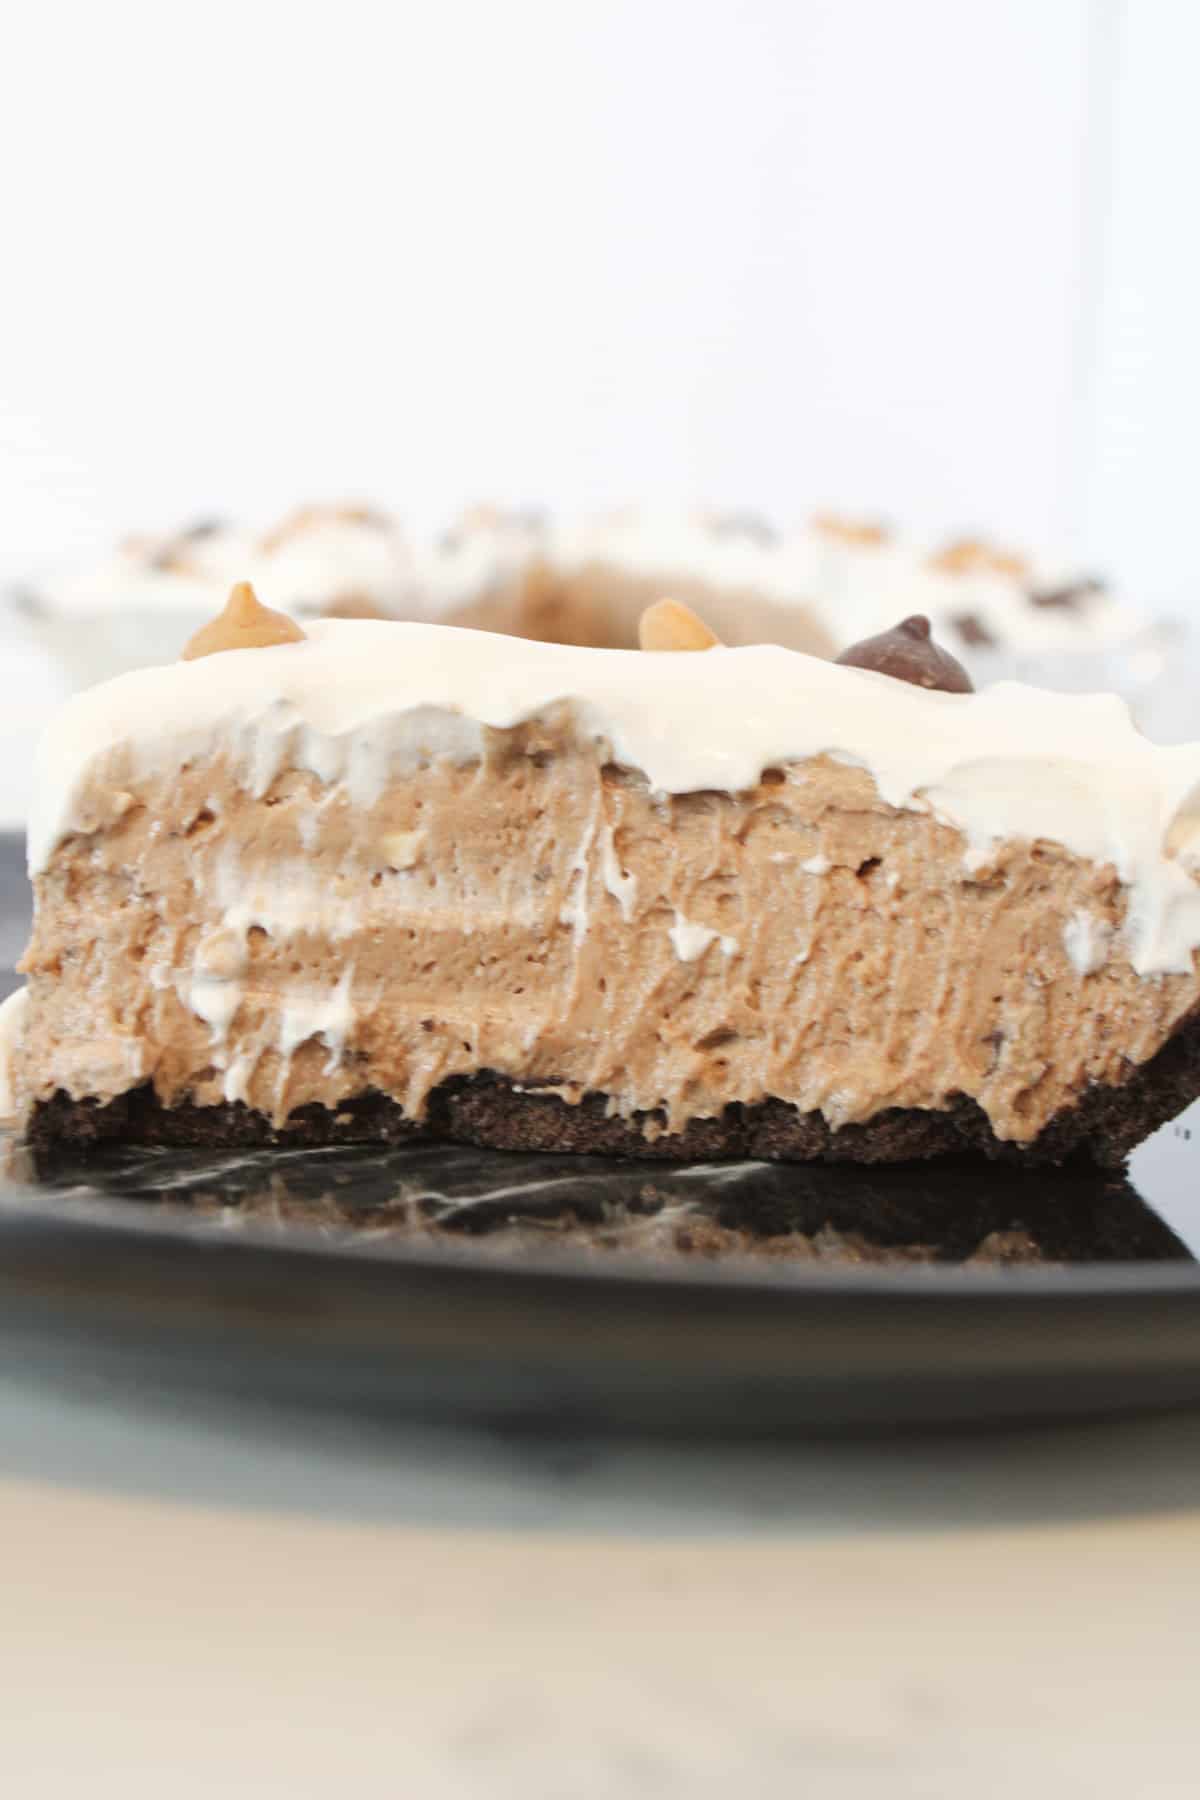 Slice of no bake chocolate peanut butter pie on a plate.